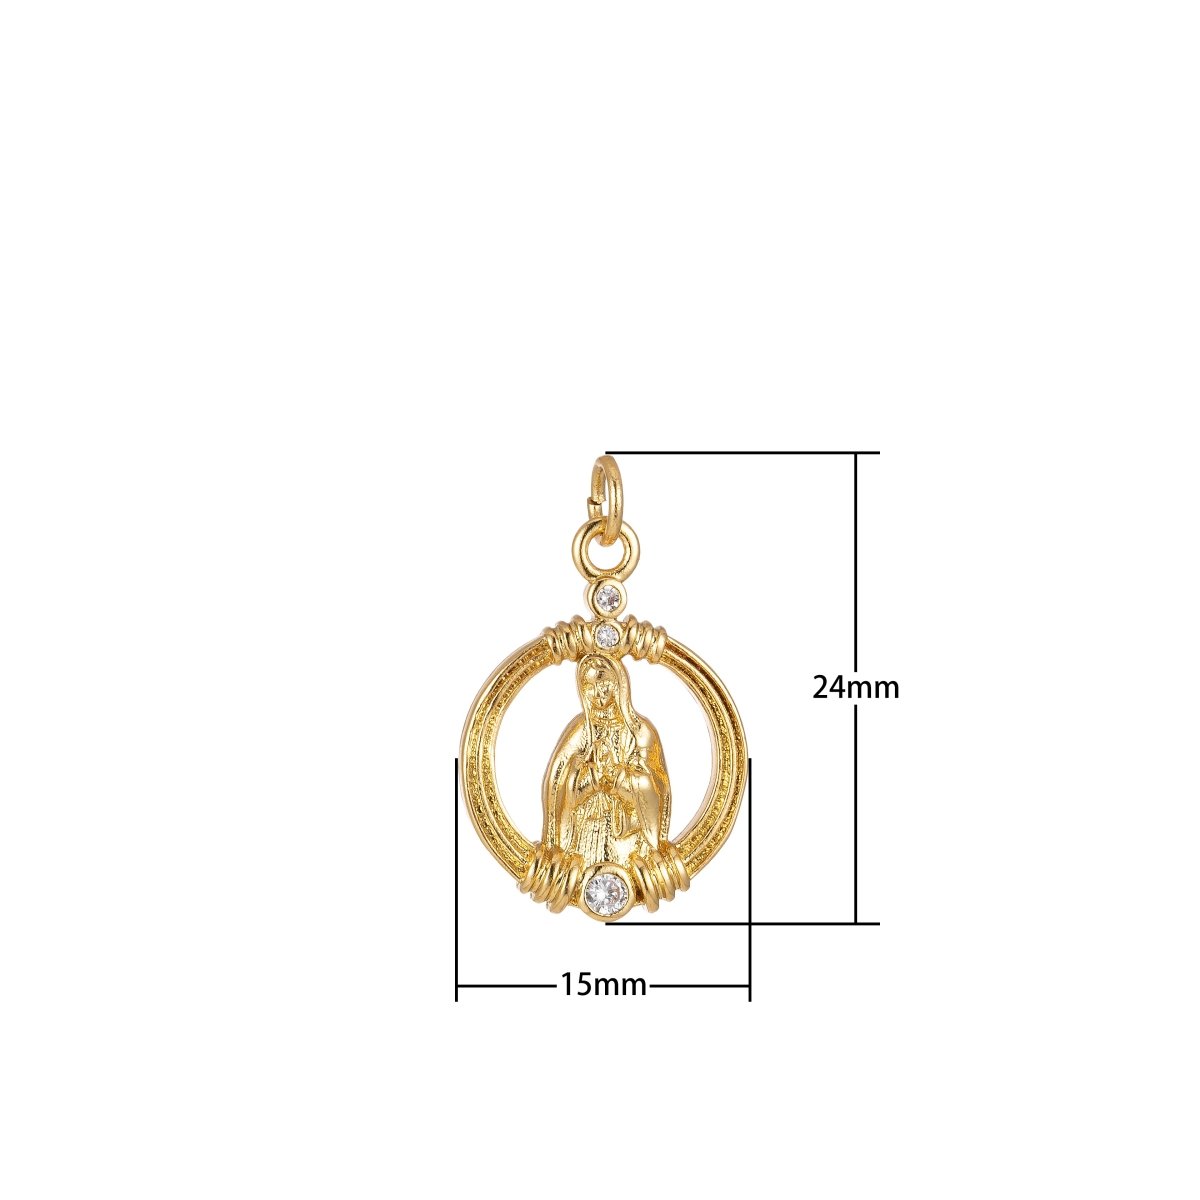 Dainty Gold Elegant Simple Religious Mother Mary Charm Pendant for Religious Jewelry Making E-900 - DLUXCA